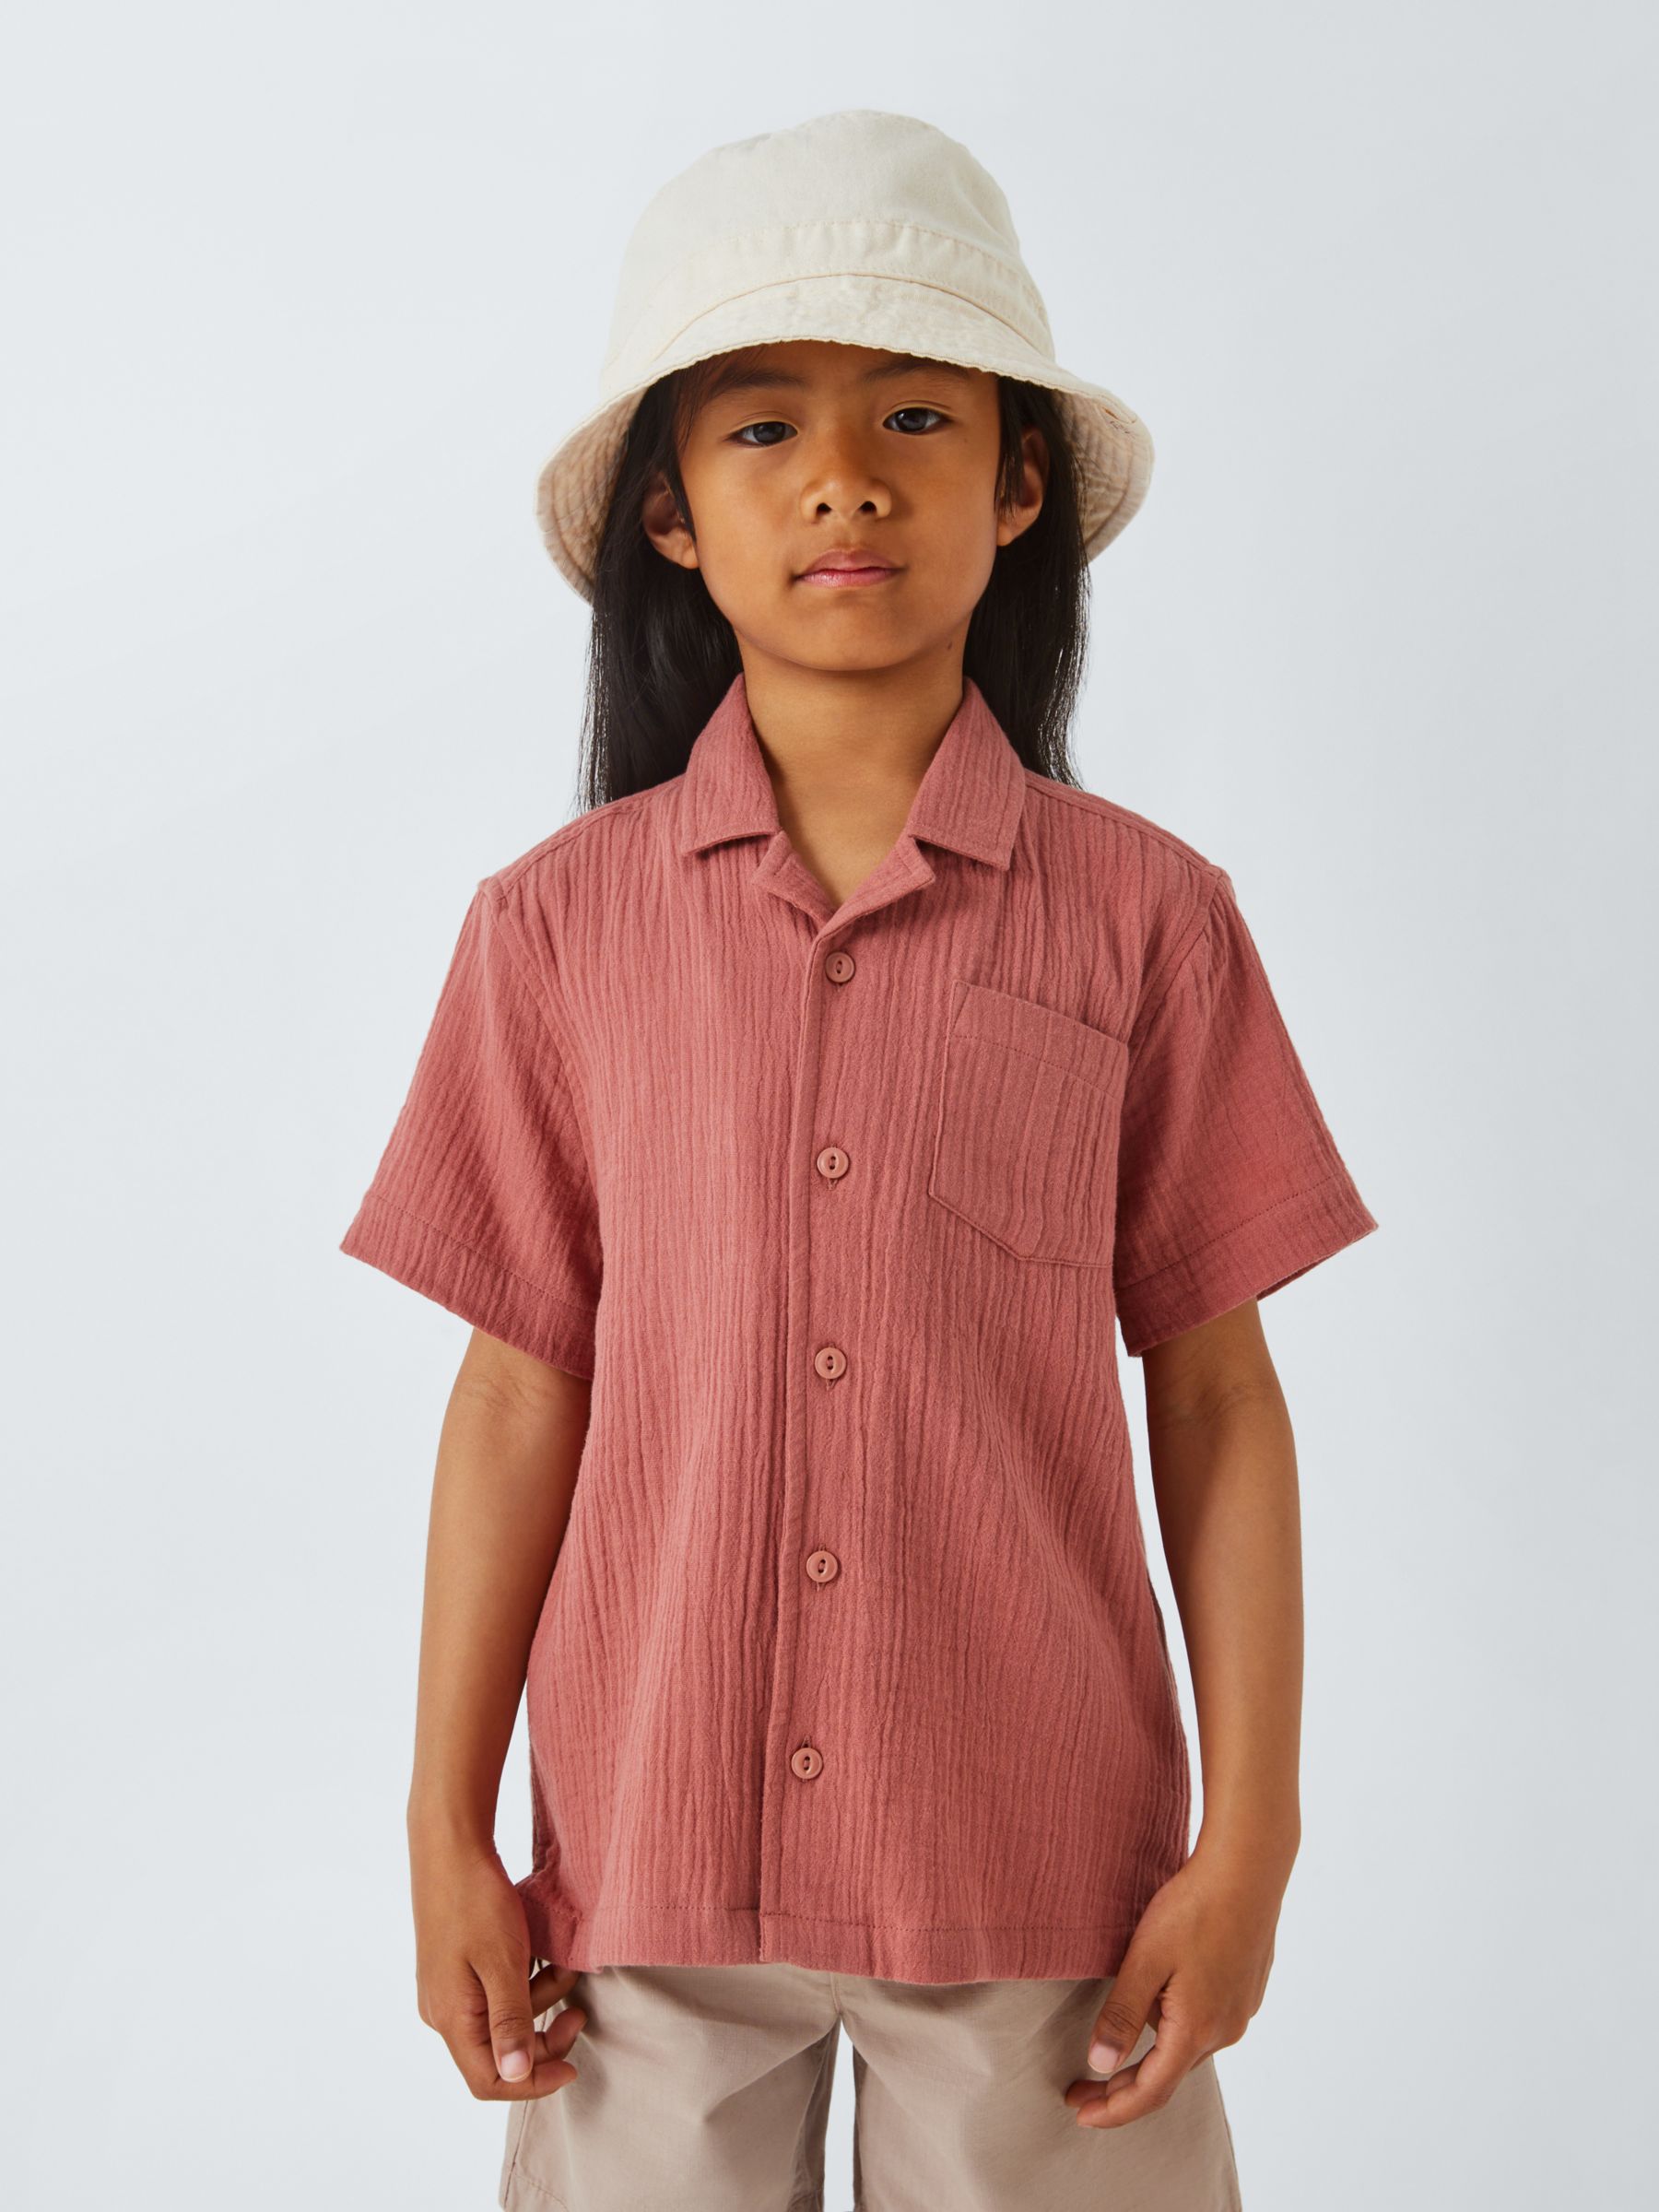 John Lewis Kids' Cheesecloth Cotton Short Sleeve Shirt, Red, 6 years